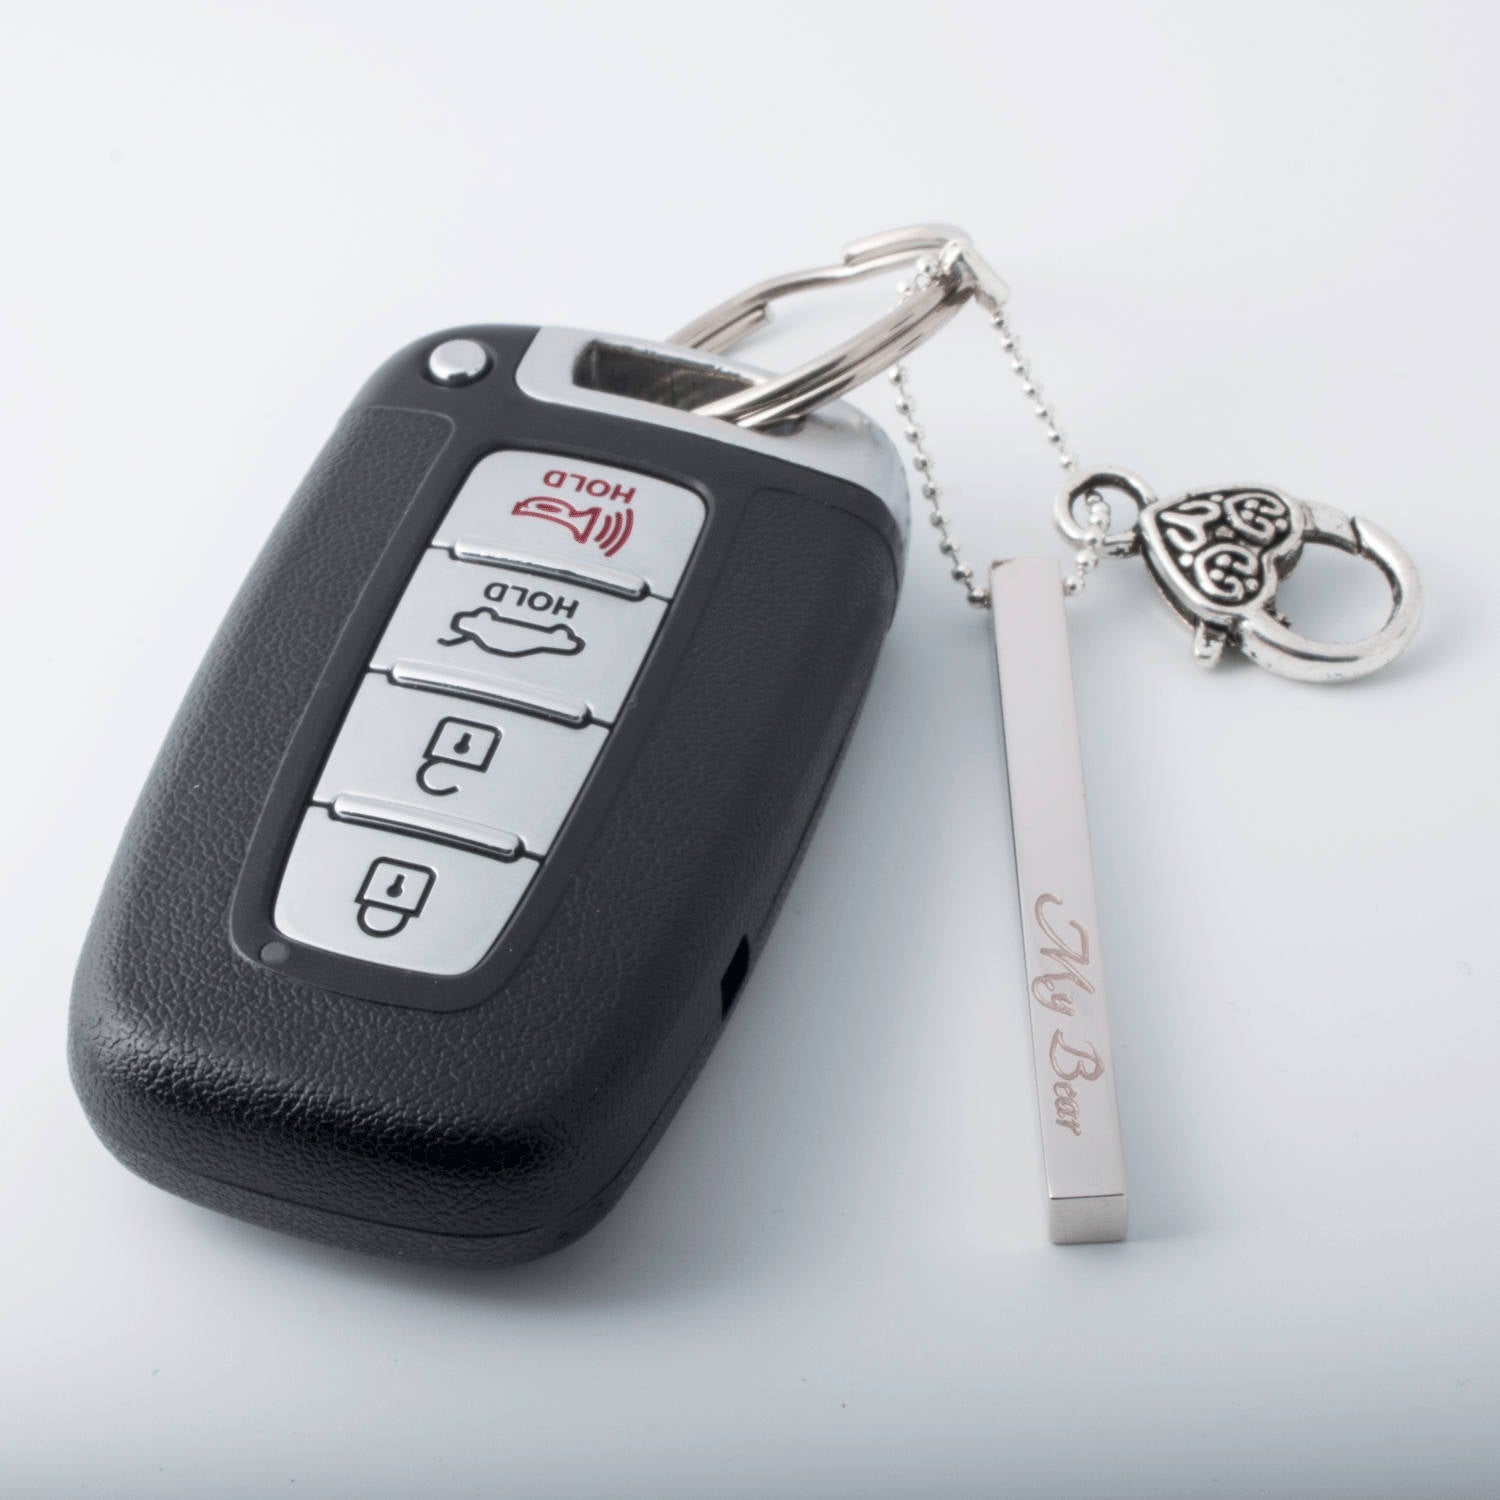 Buy Custom Unique Keychain Car Accessories - Personalized Gifts at Petite Boutique